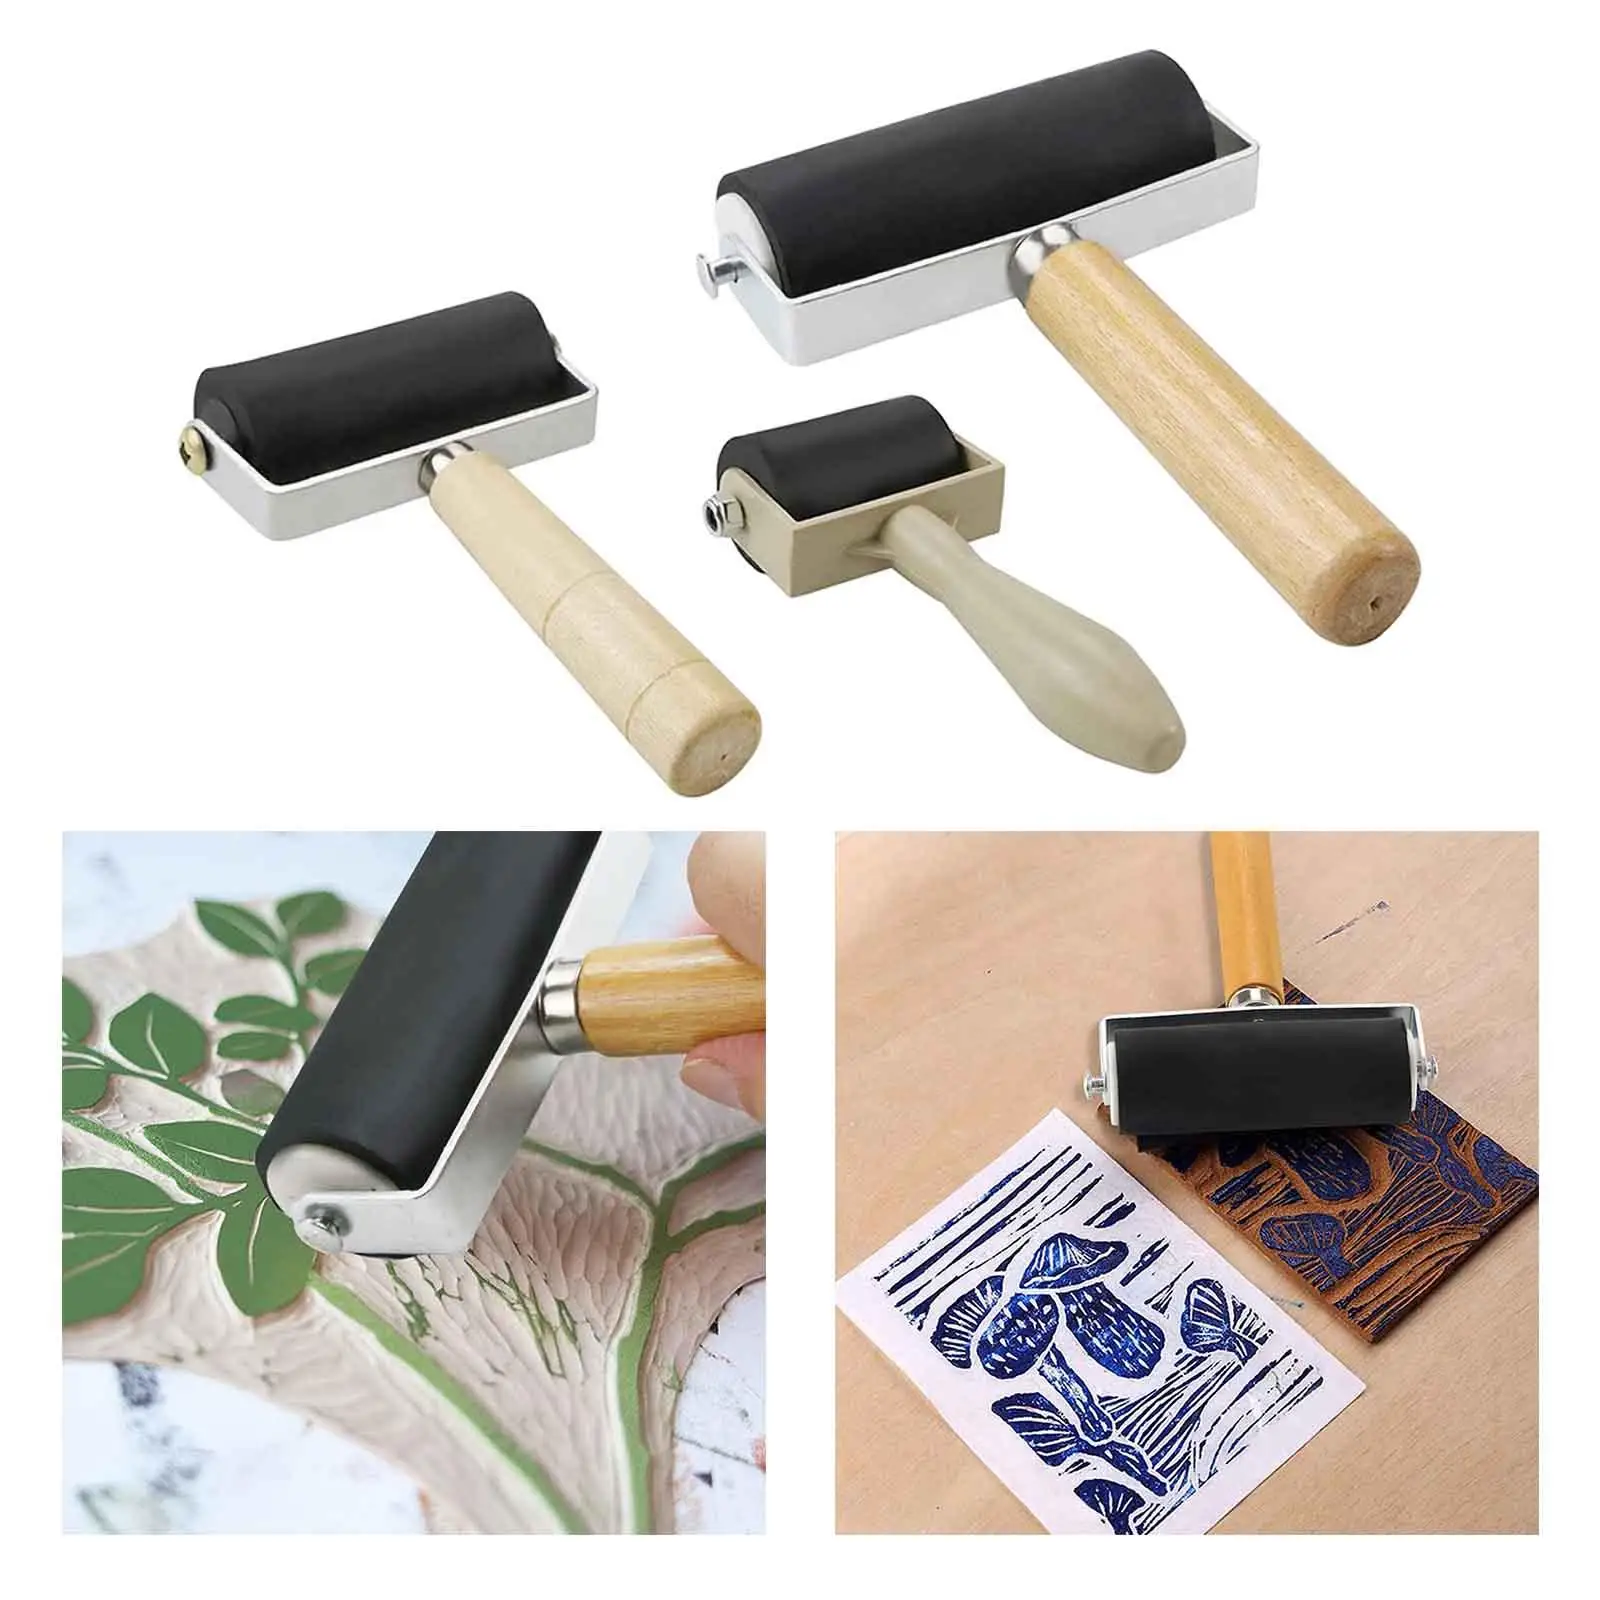 3x Rubber Brayer Roller Arts Crafts Applicator for Carved Surfaces Printing